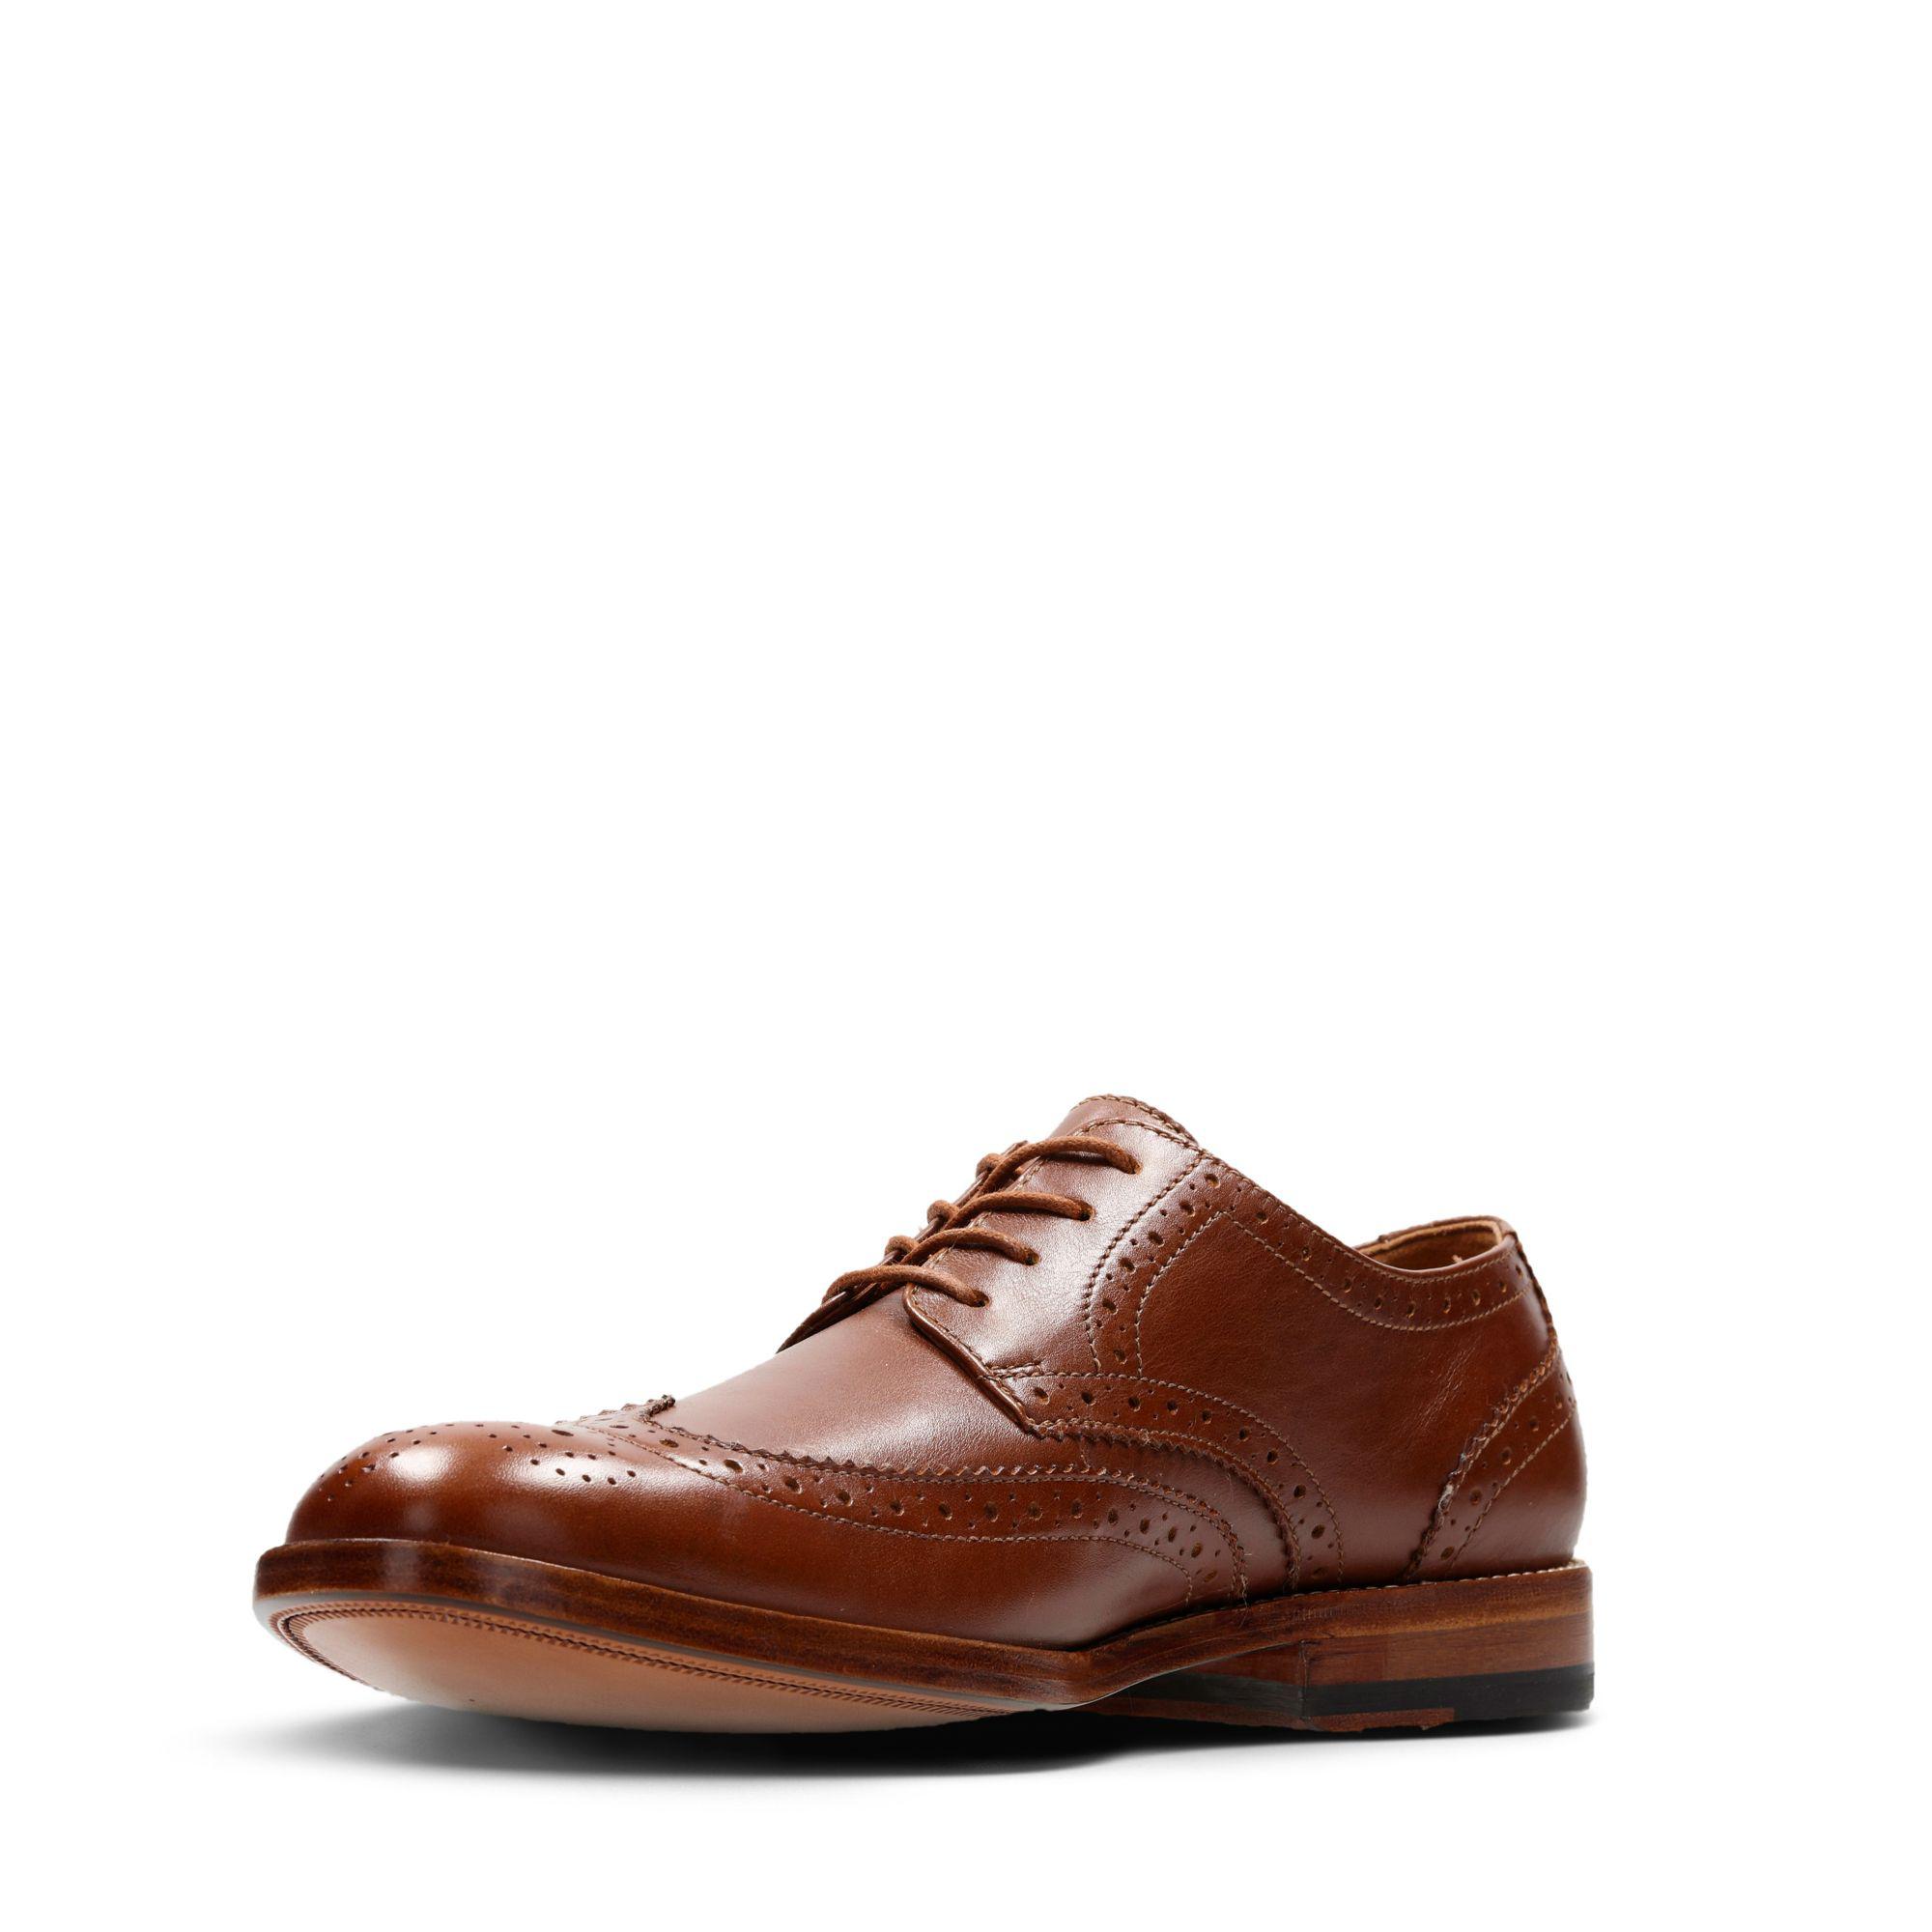 Clarks Leather James Wing in Tan Leather (Brown) for Men - Lyst